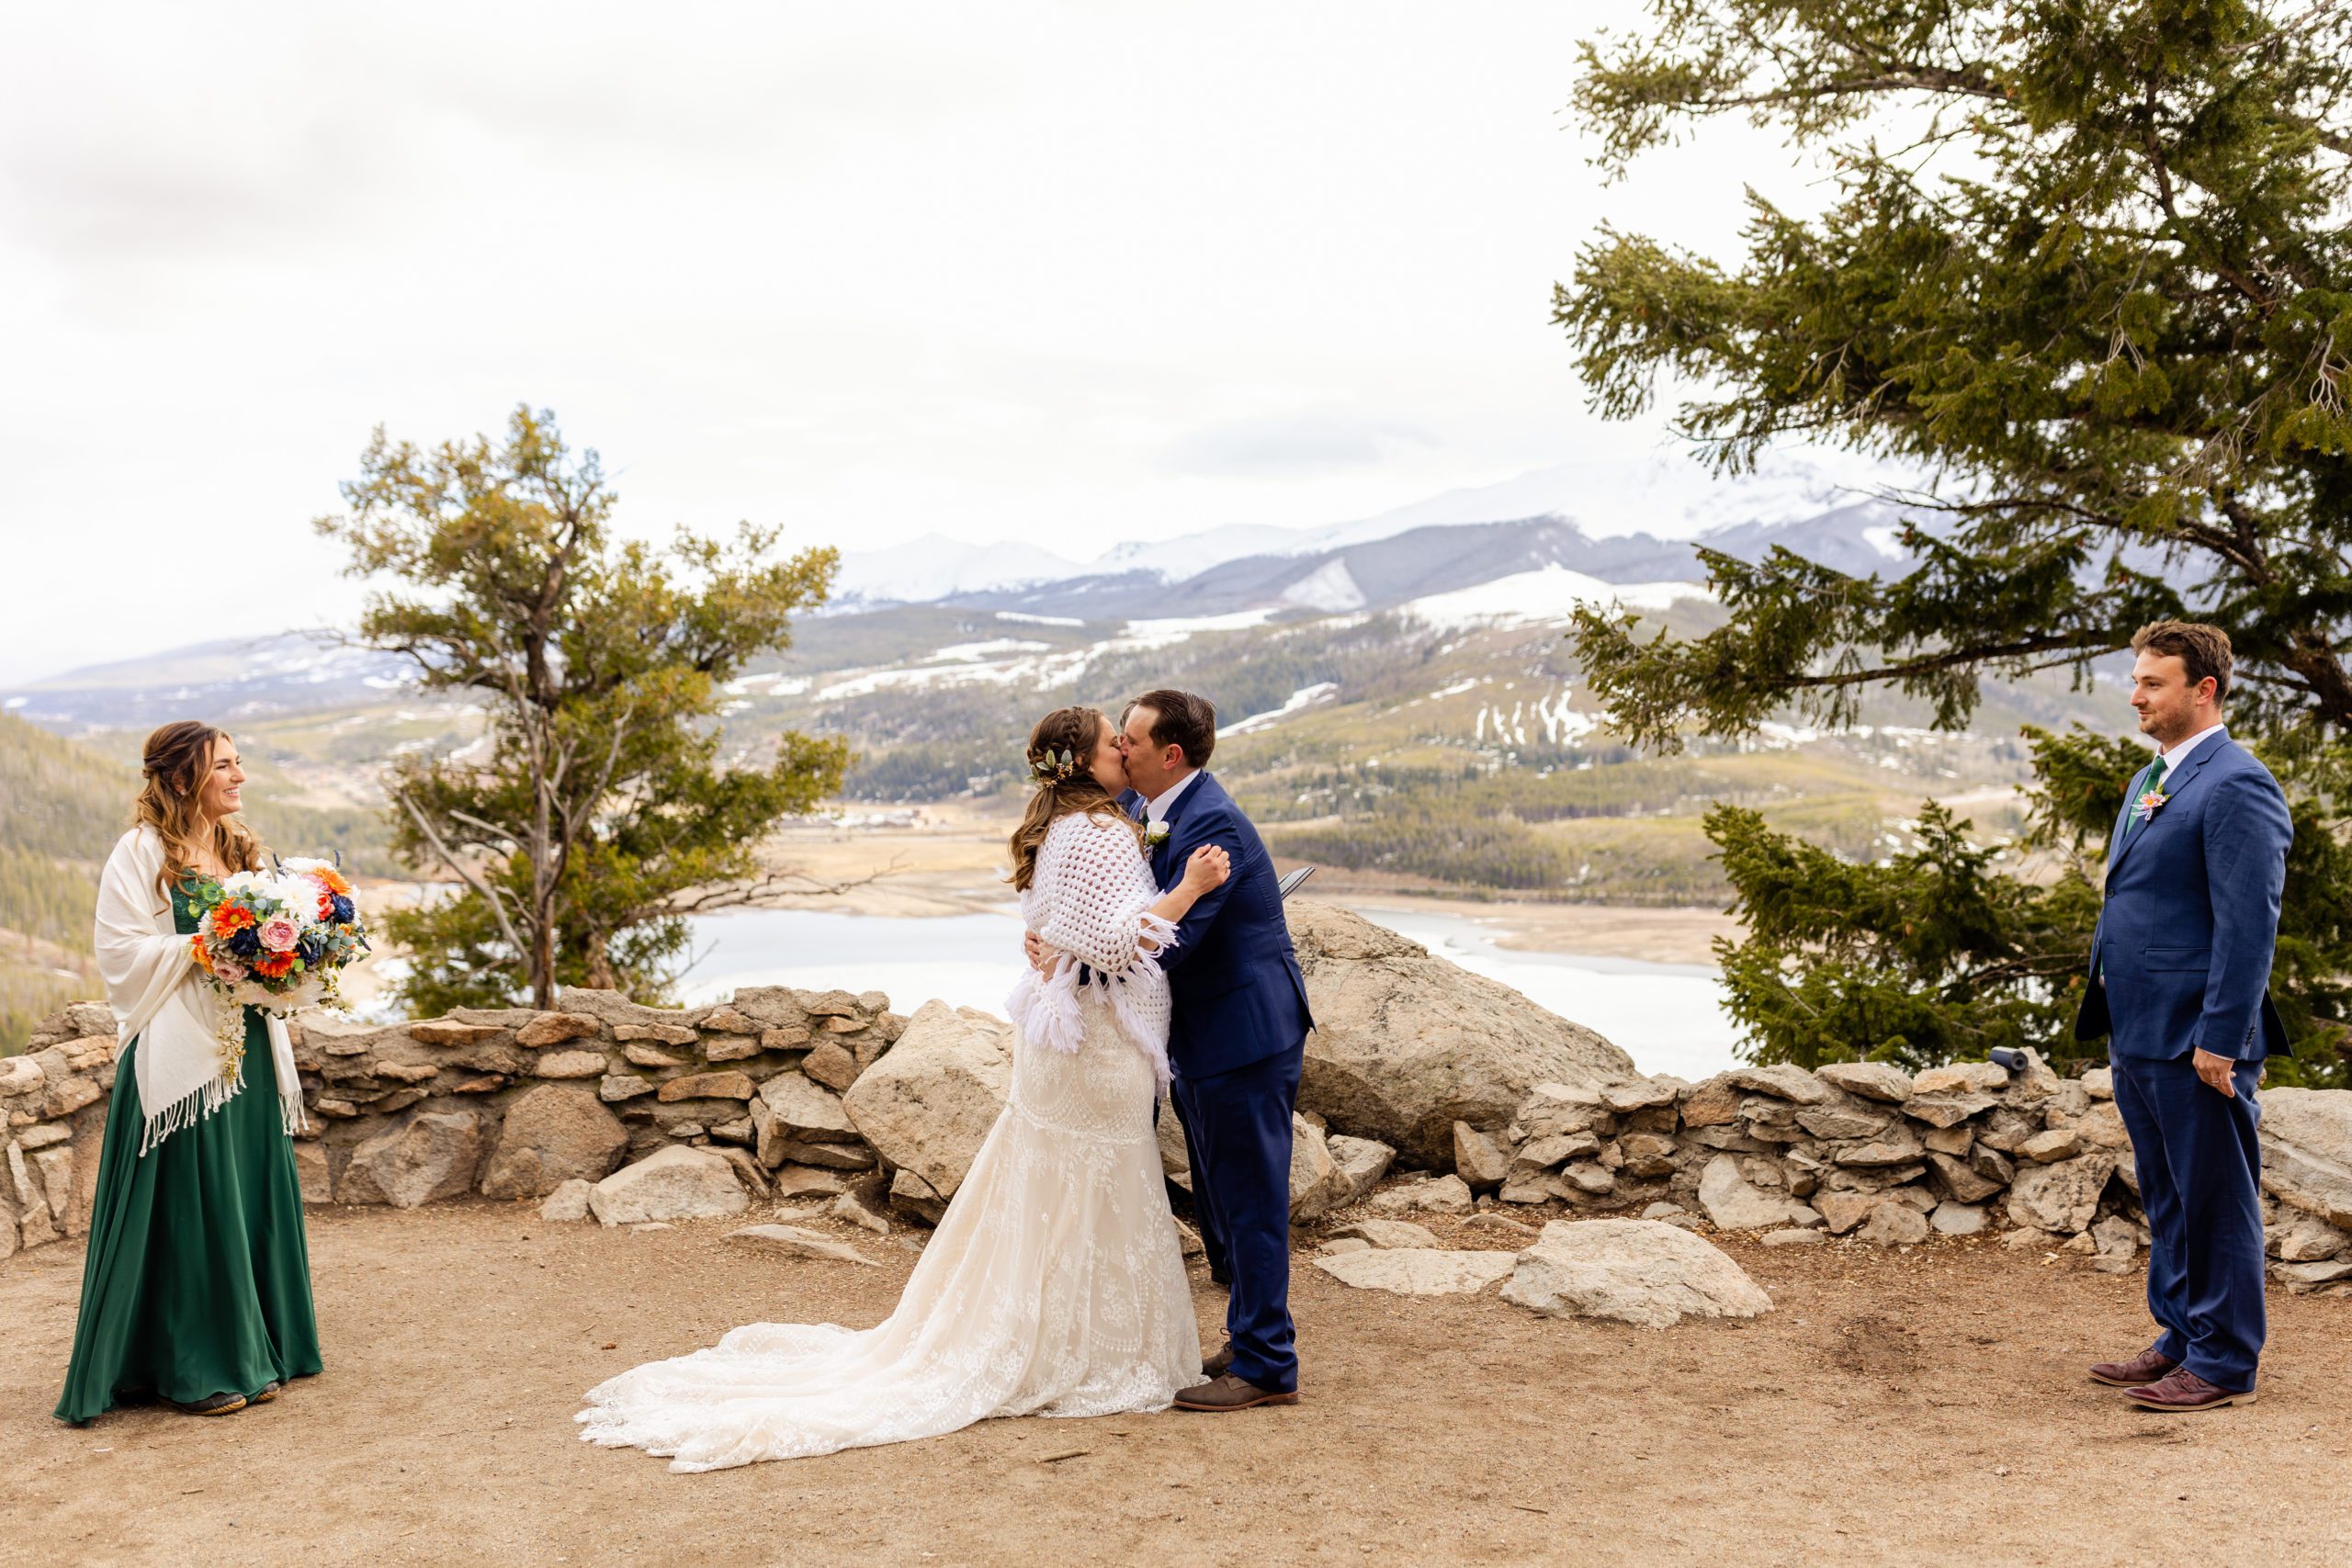 The bride and groom during their first kiss at the Sapphire Point Elopement ceremony! 